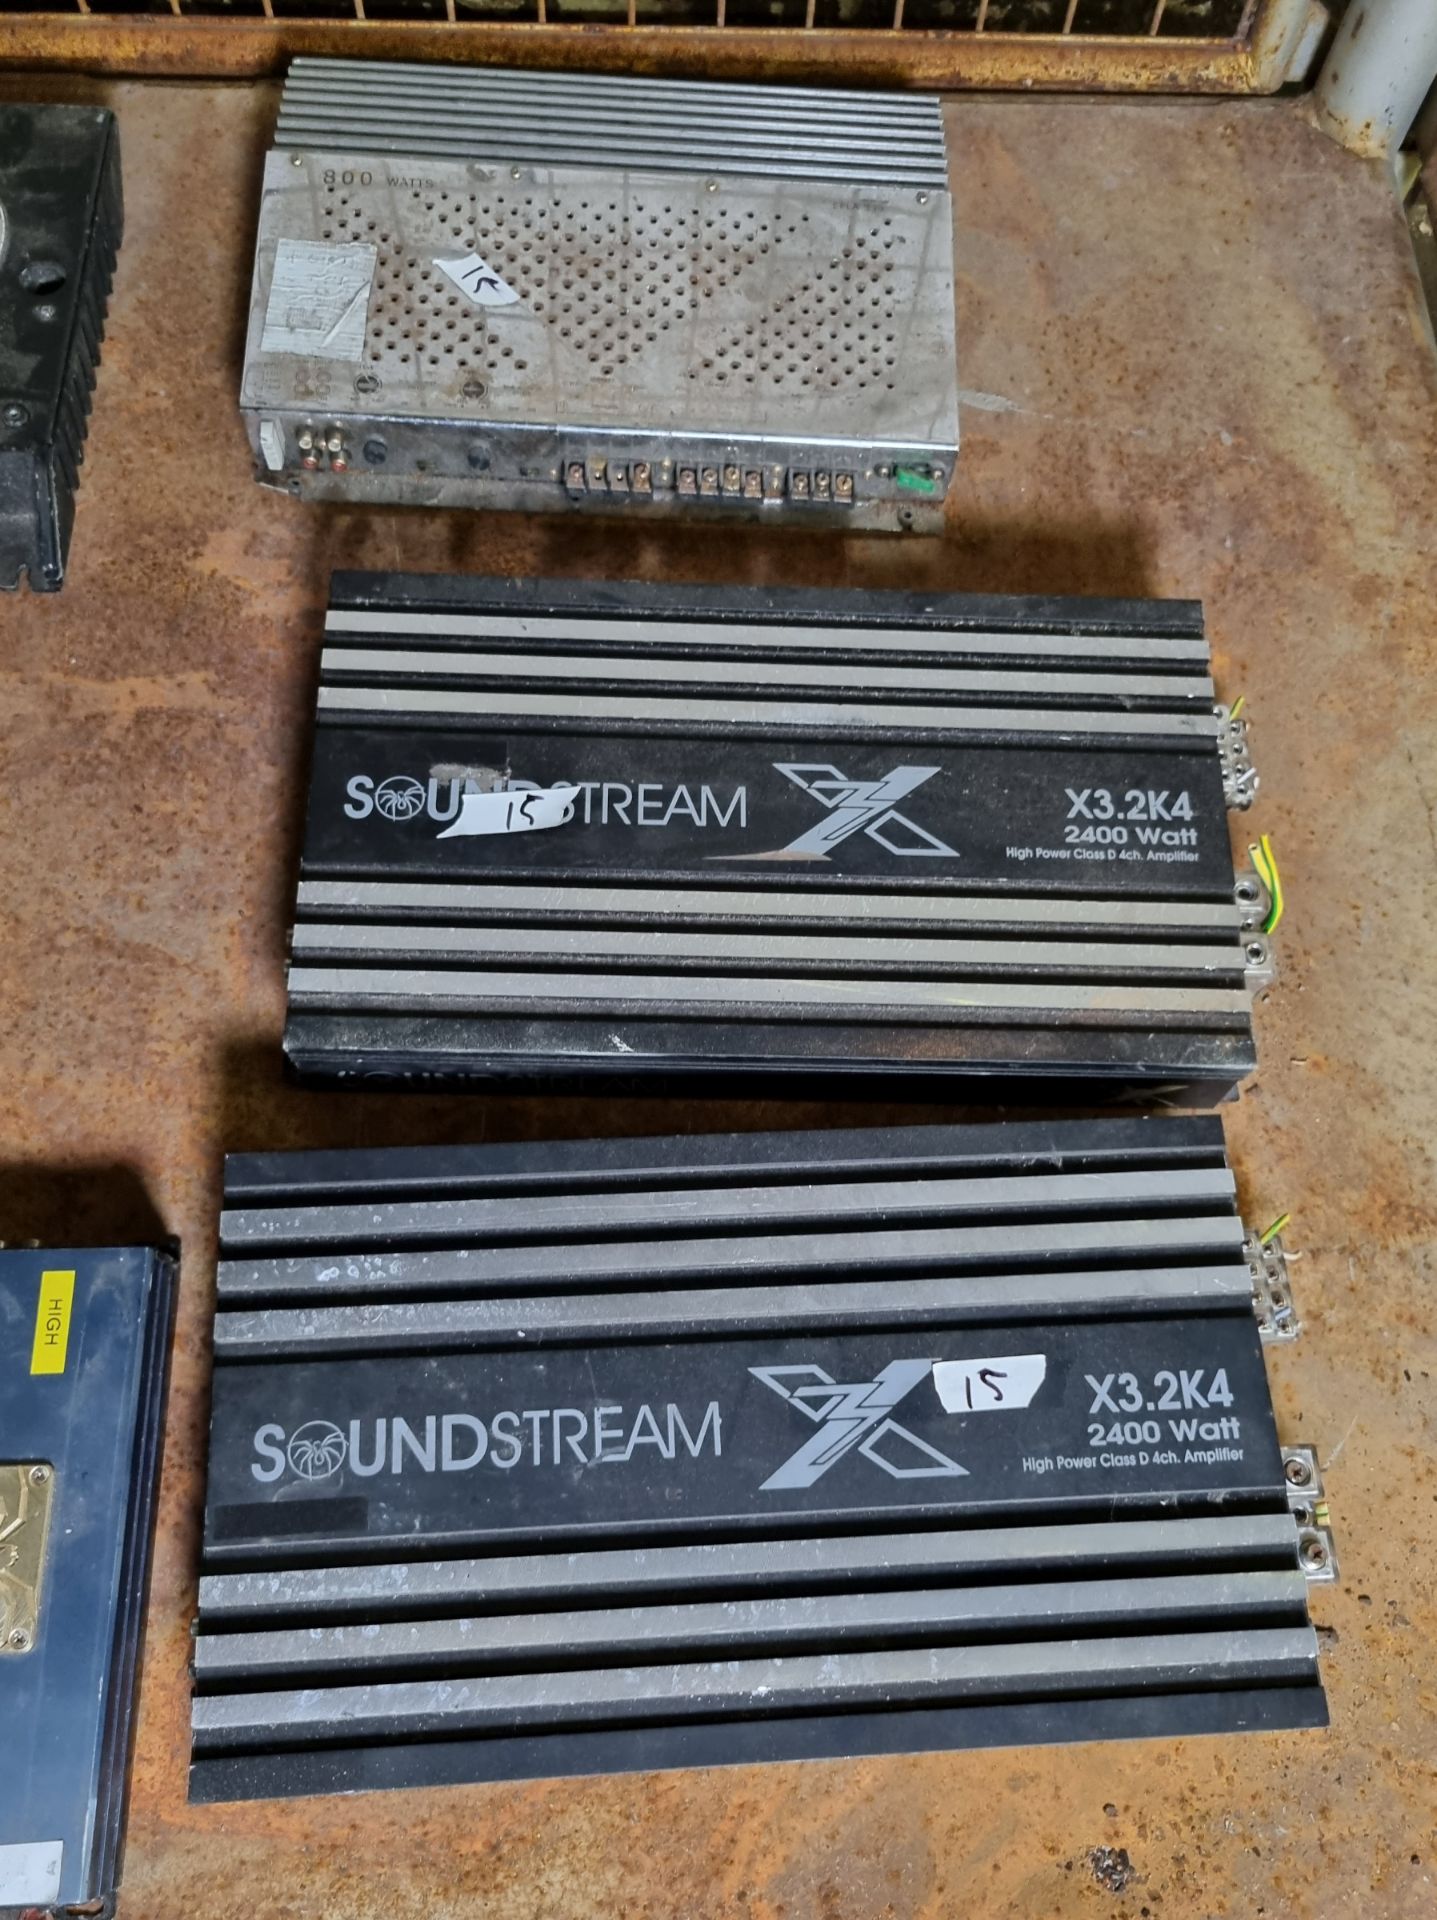 Car stereo amplifiers - Xplod, Soundstream - Image 2 of 8